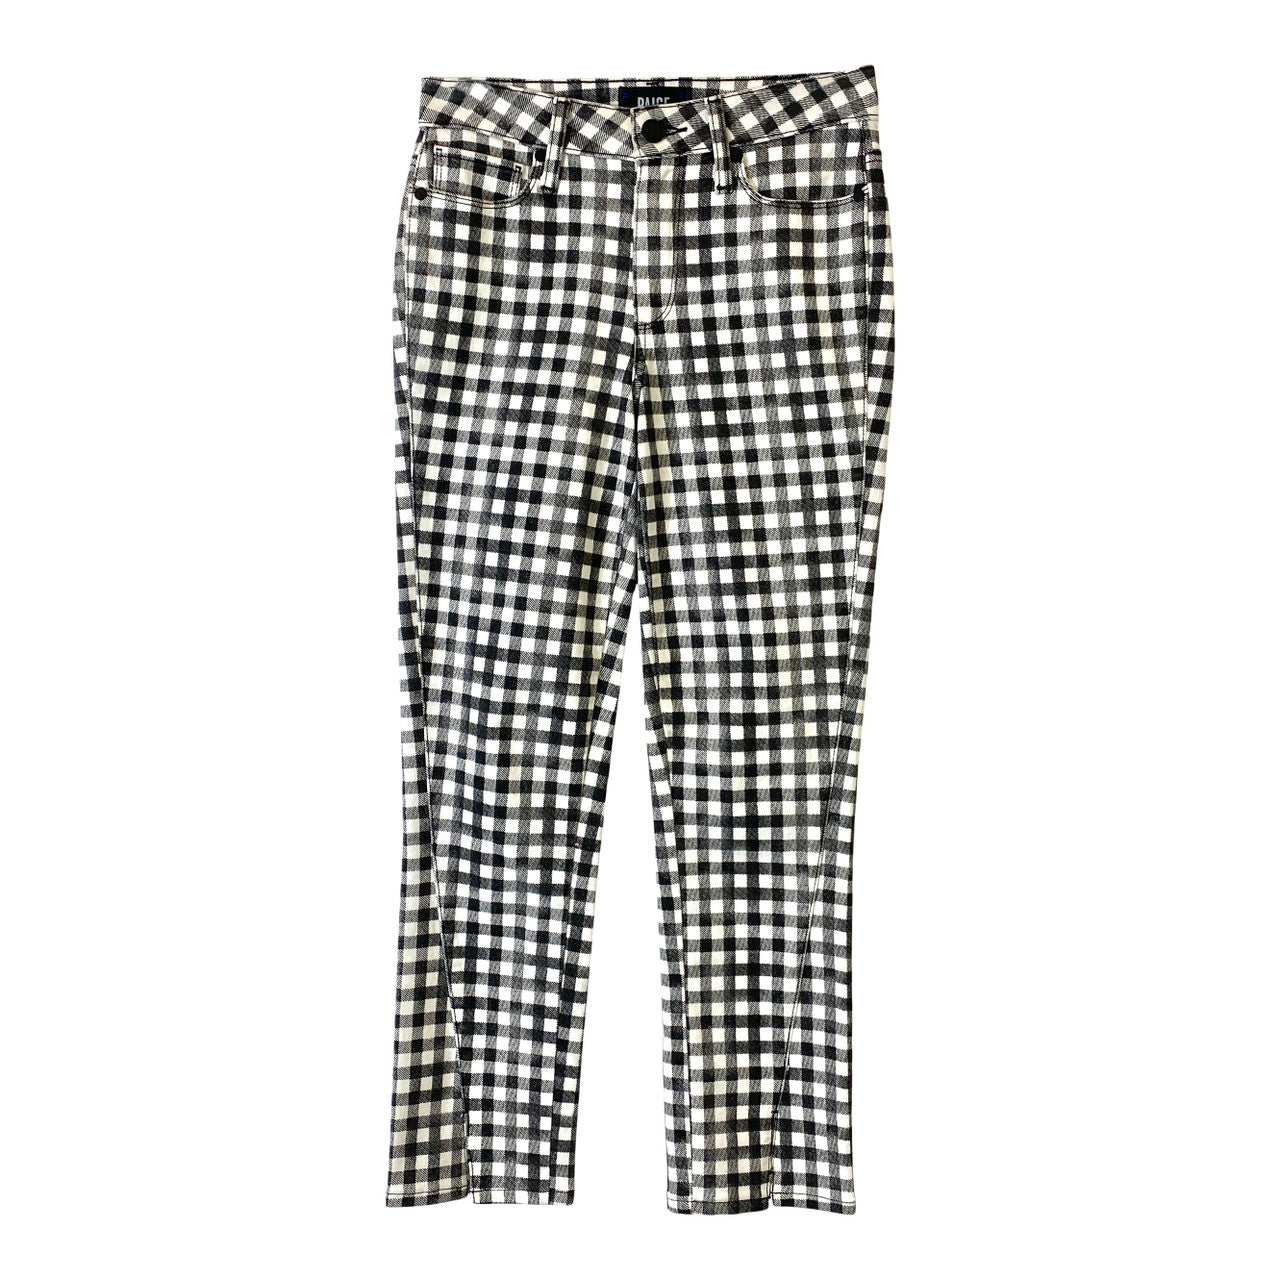 Paige Hoxton Gingham Skinny Jeans- Front